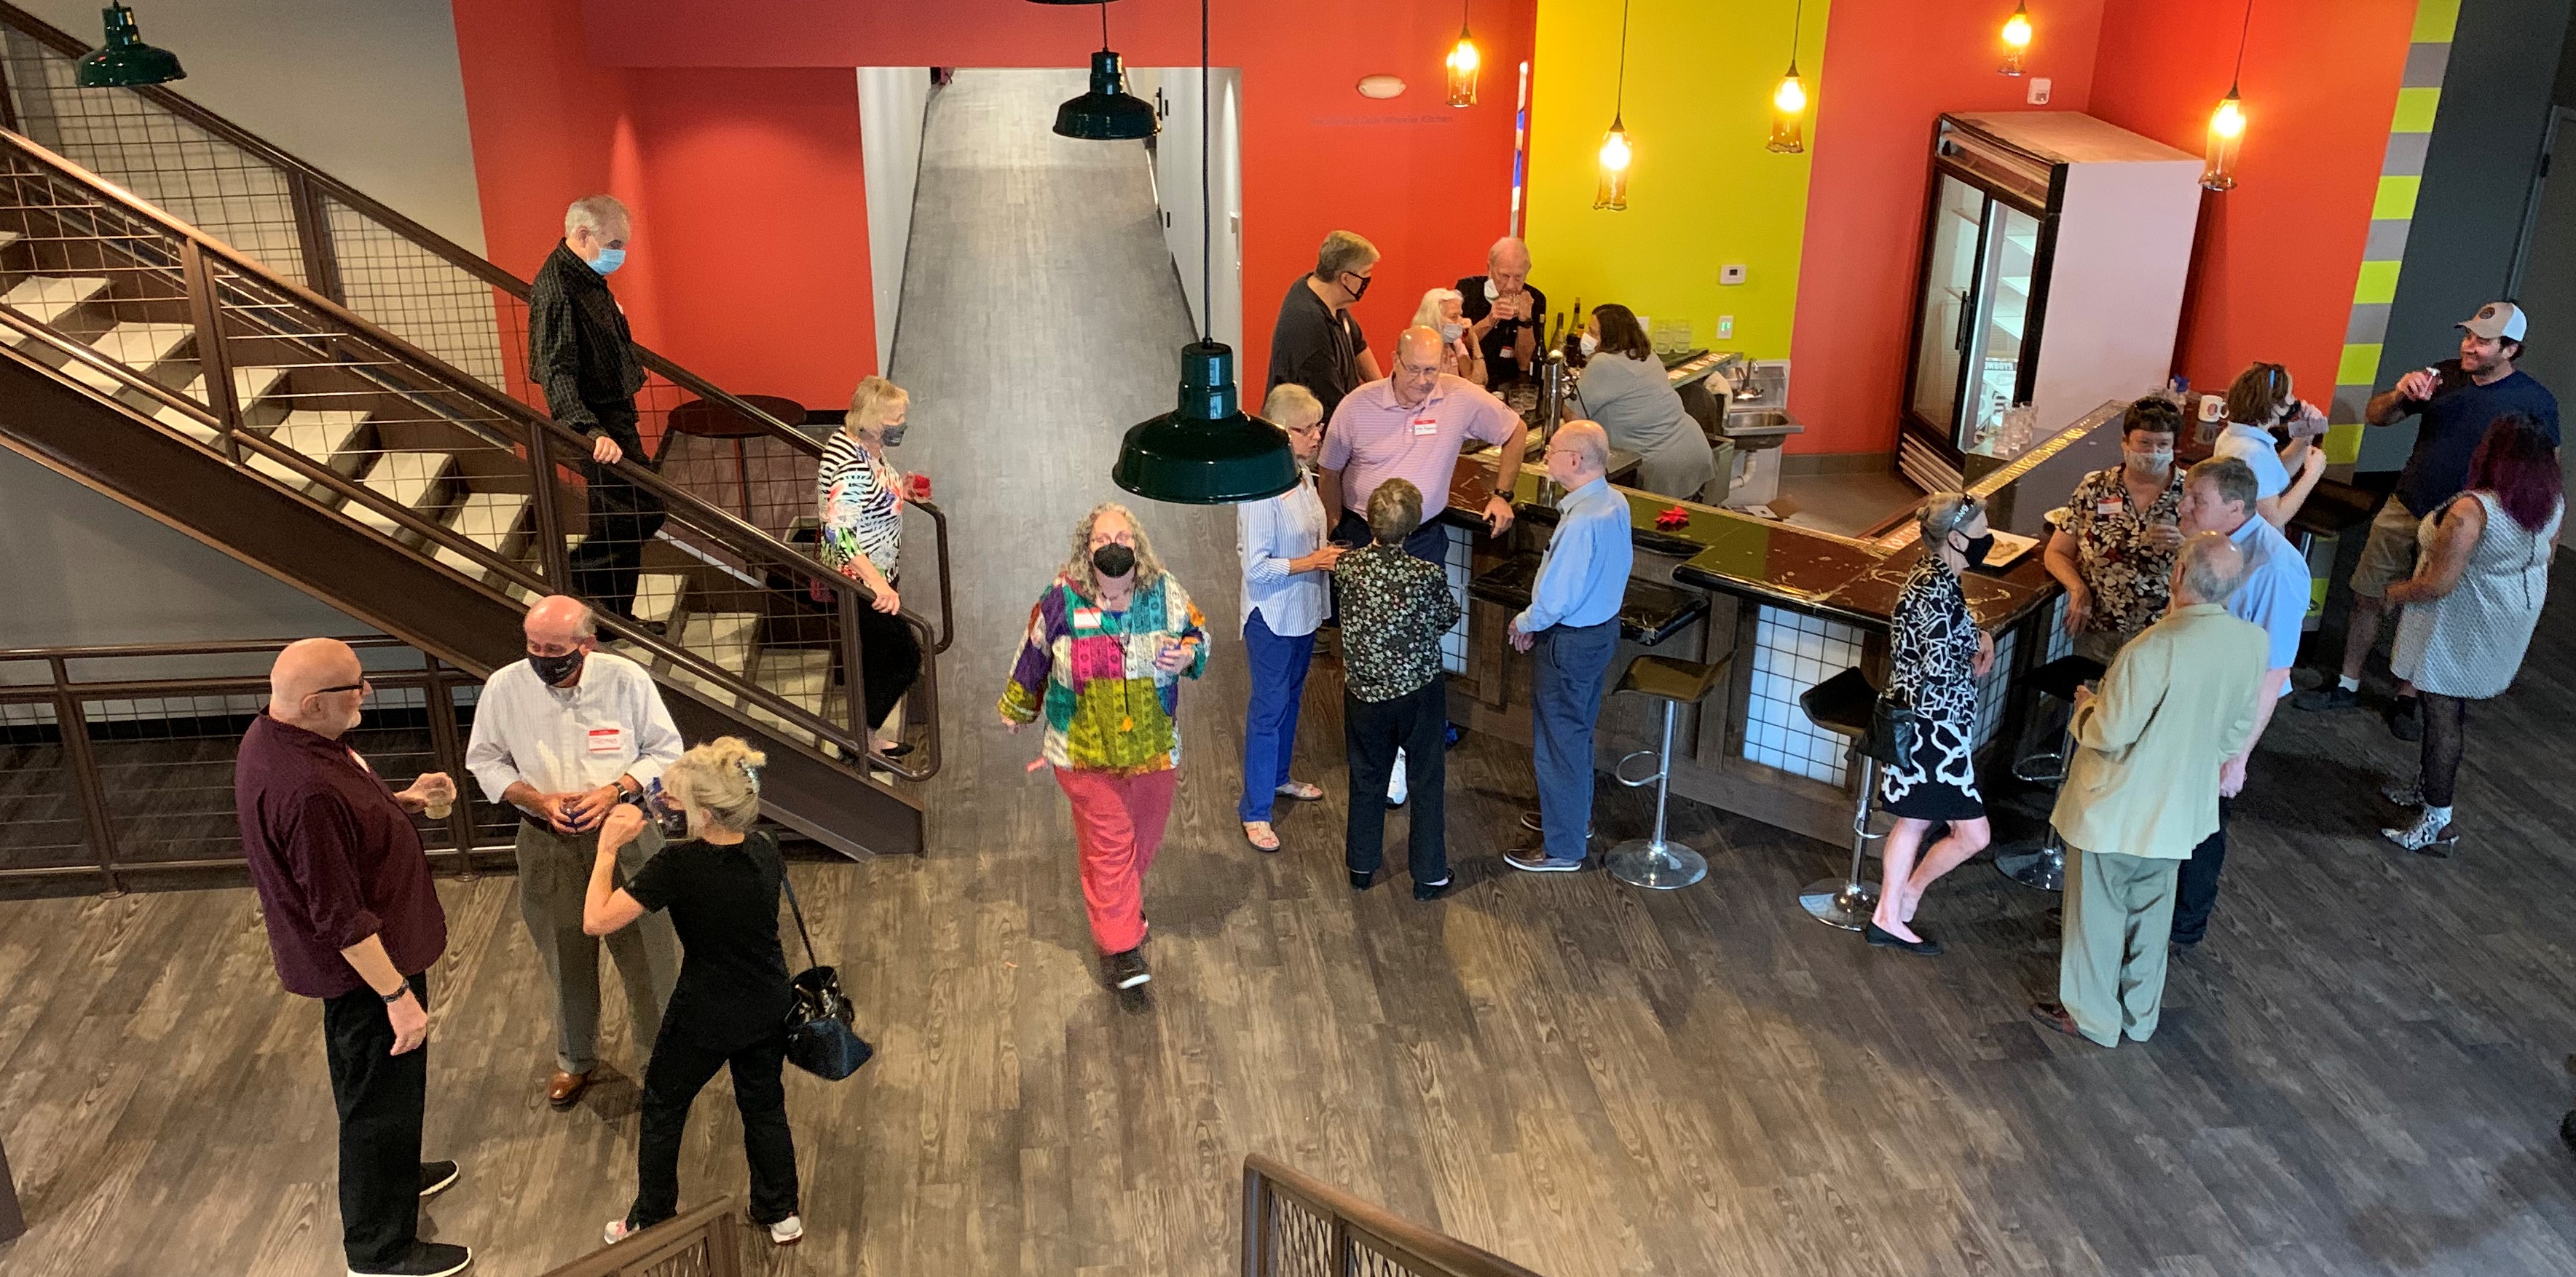 People stand around Stage West's new lobby, which has orange and yellow walls and a small bar area.